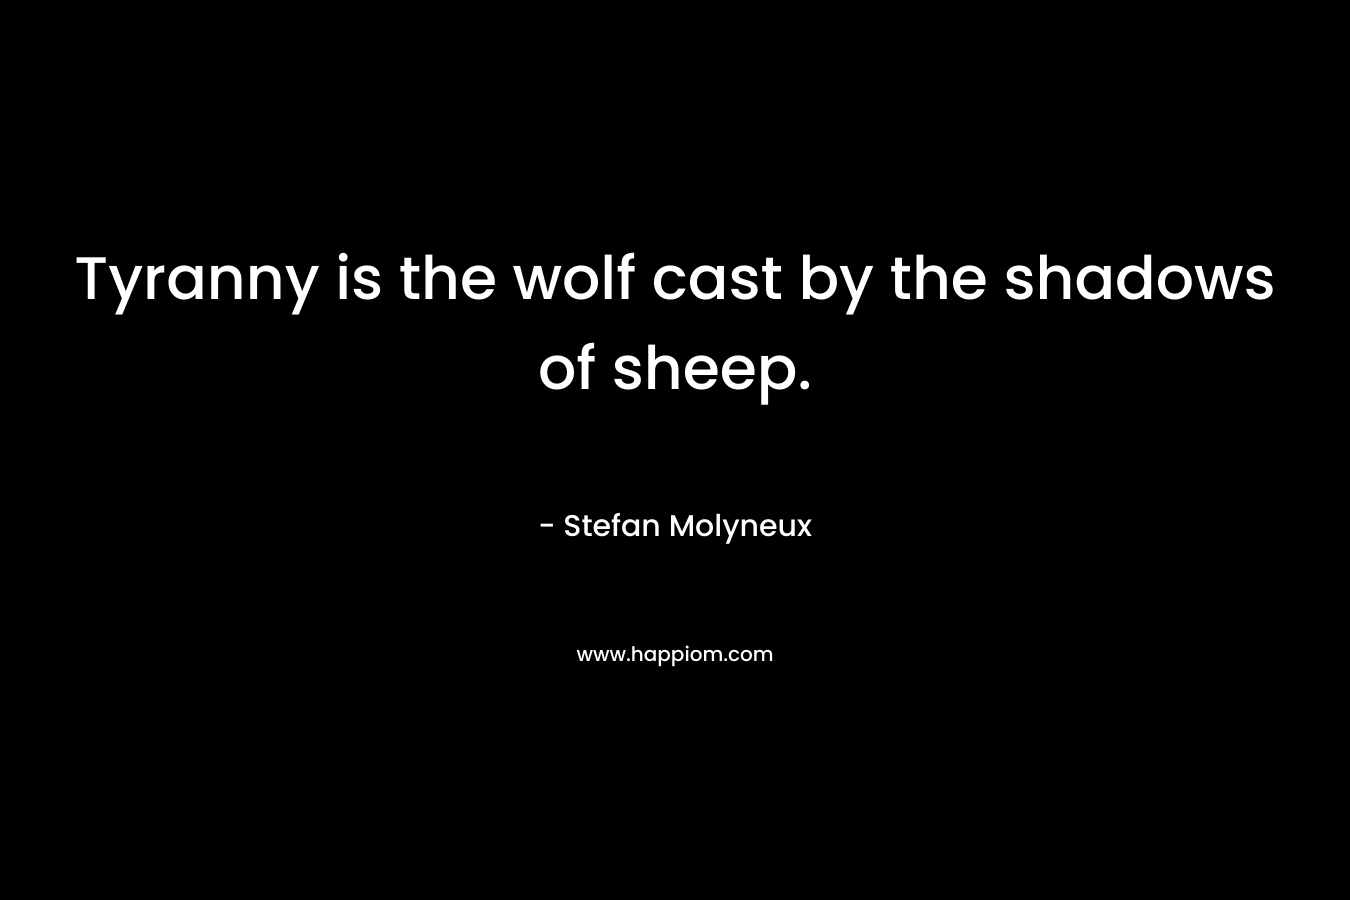 Tyranny is the wolf cast by the shadows of sheep.